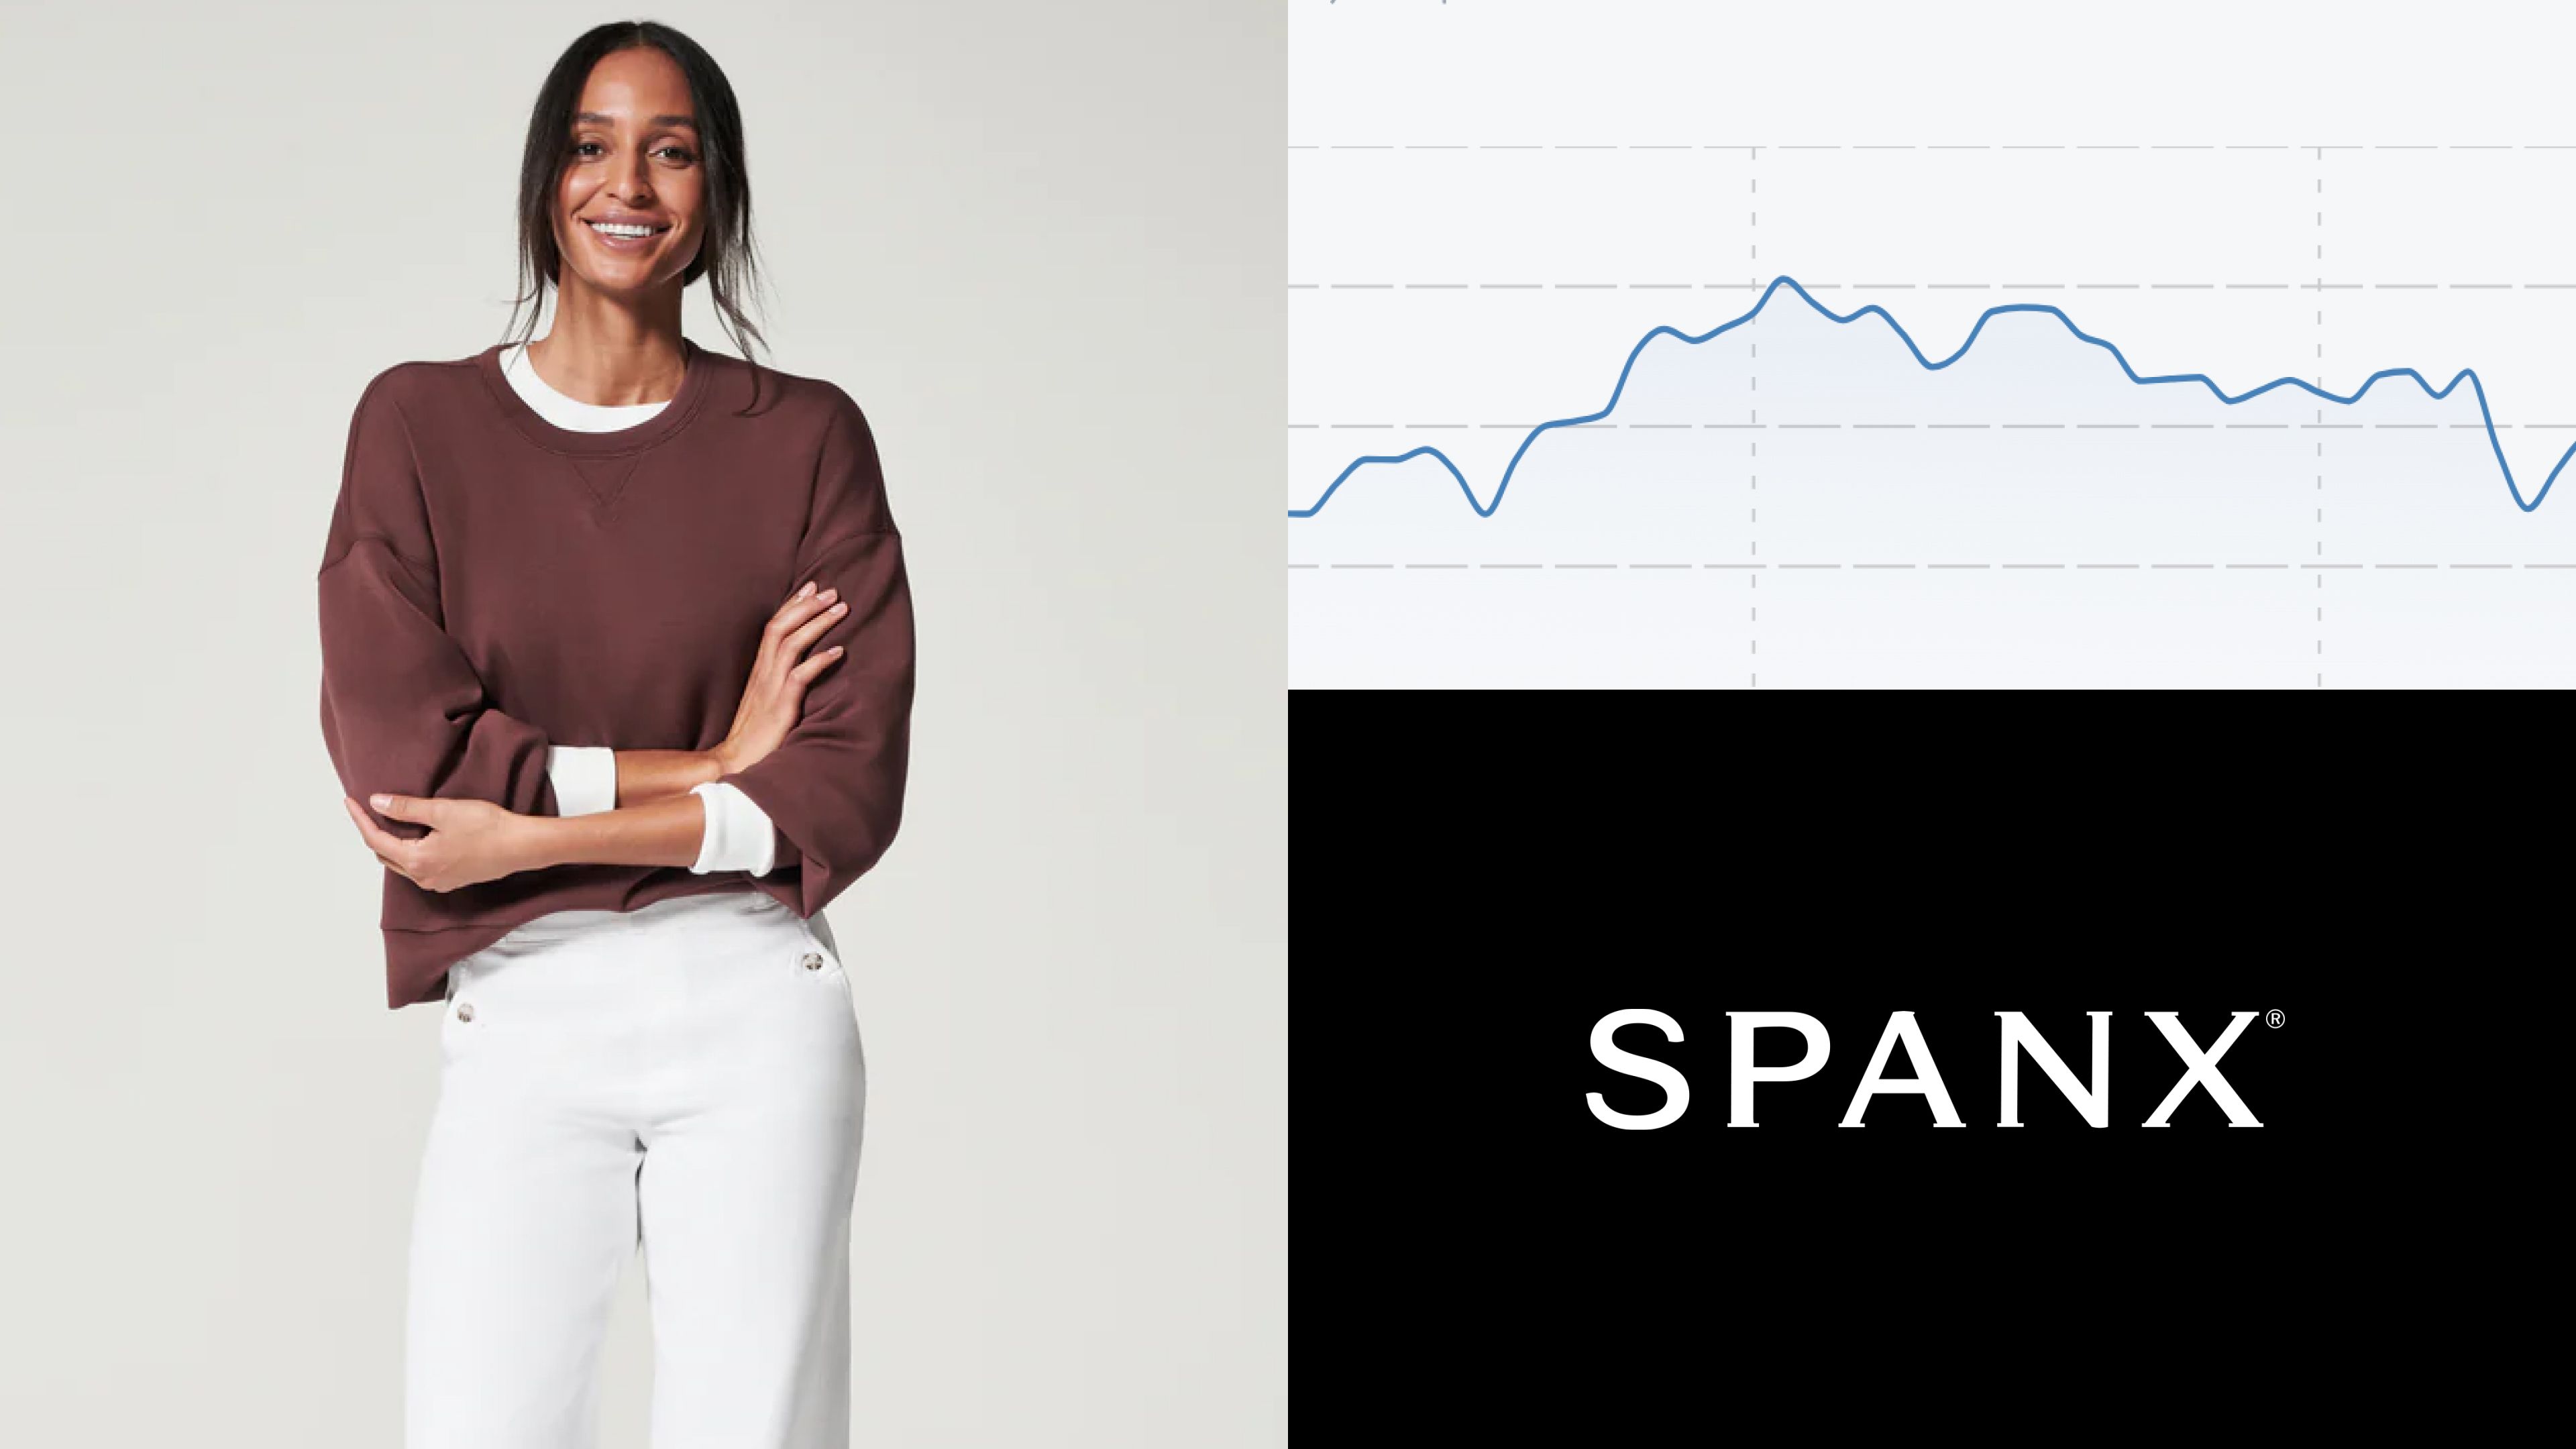 Model wearing white pants and brown sweater, SPANX logo and graph